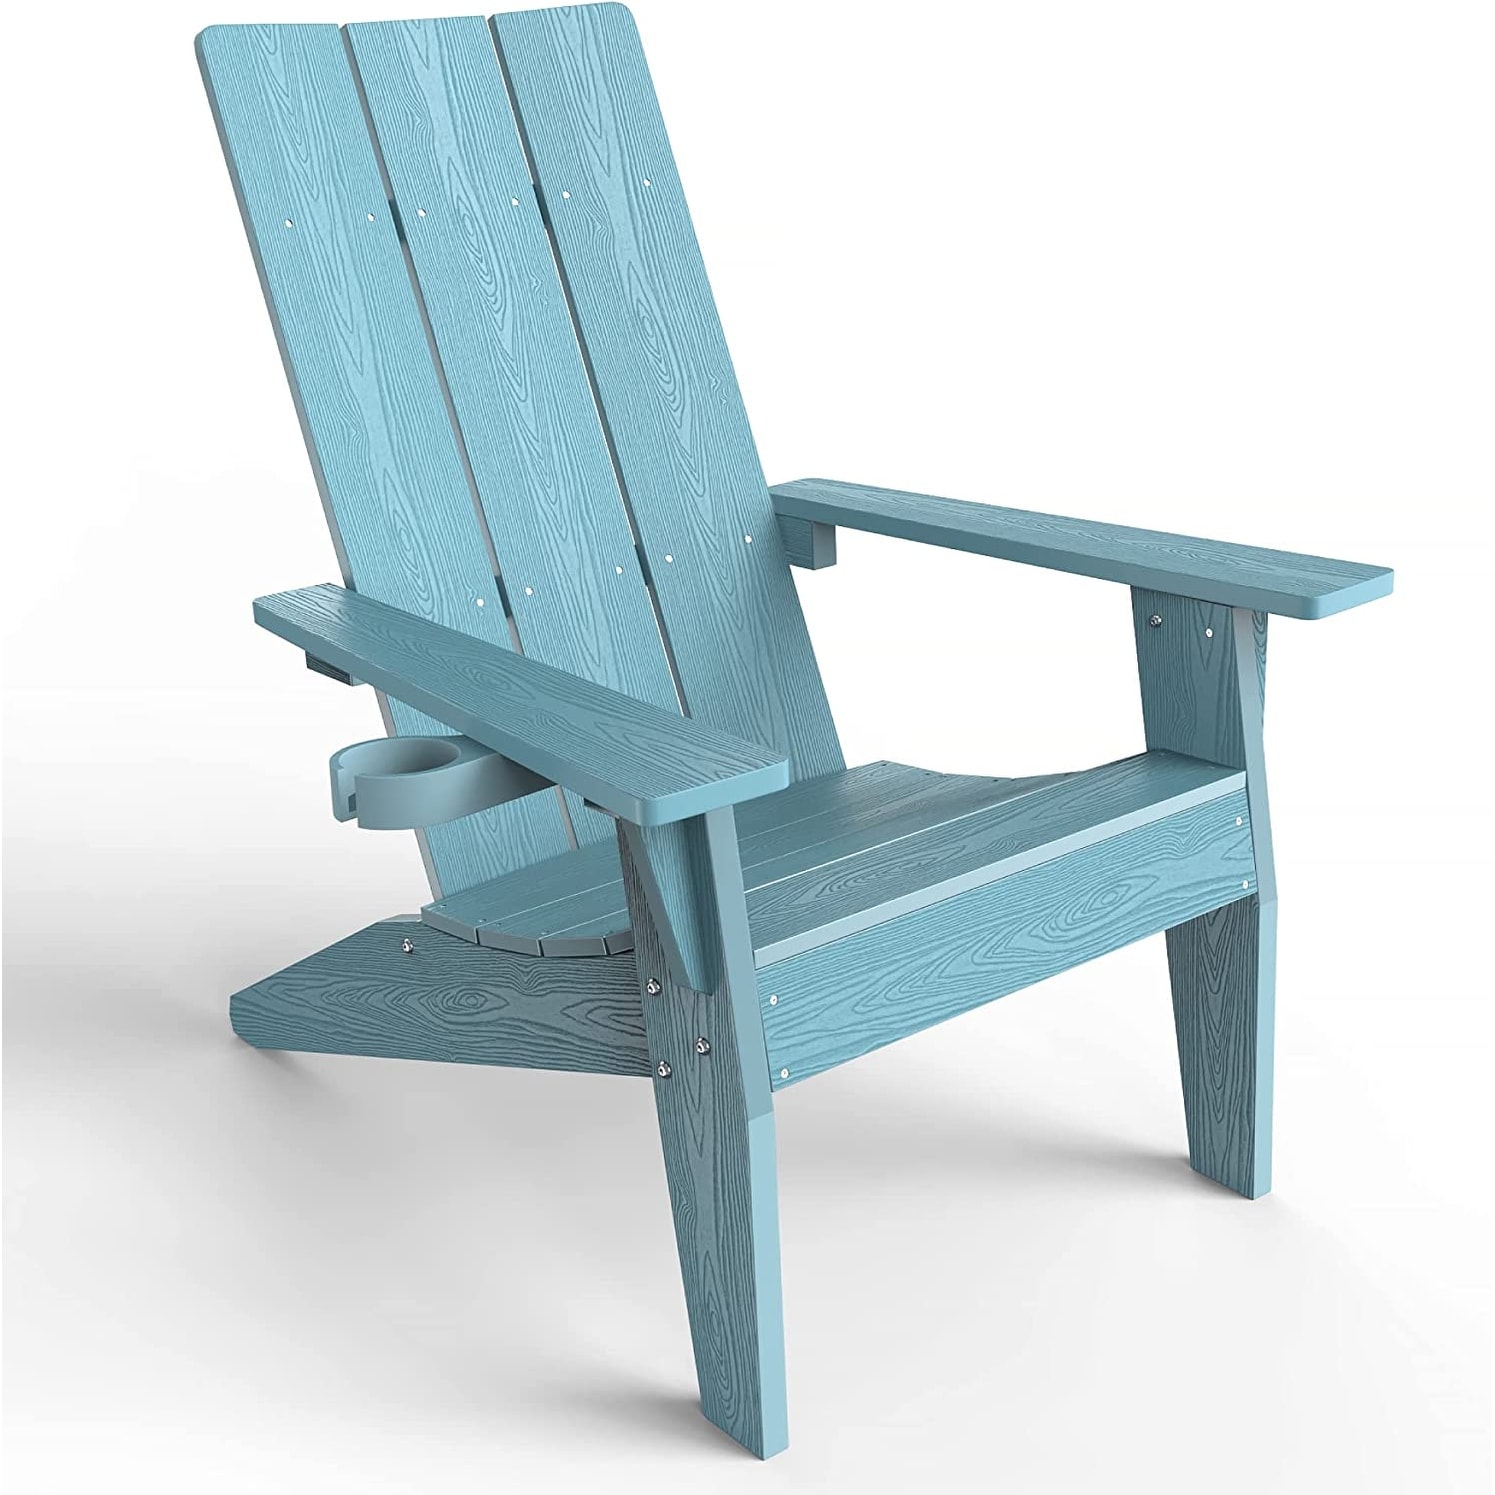 Winsoon All Weather Hips Outdoor Adirondack Chairs With Cup-holder Set Of 8